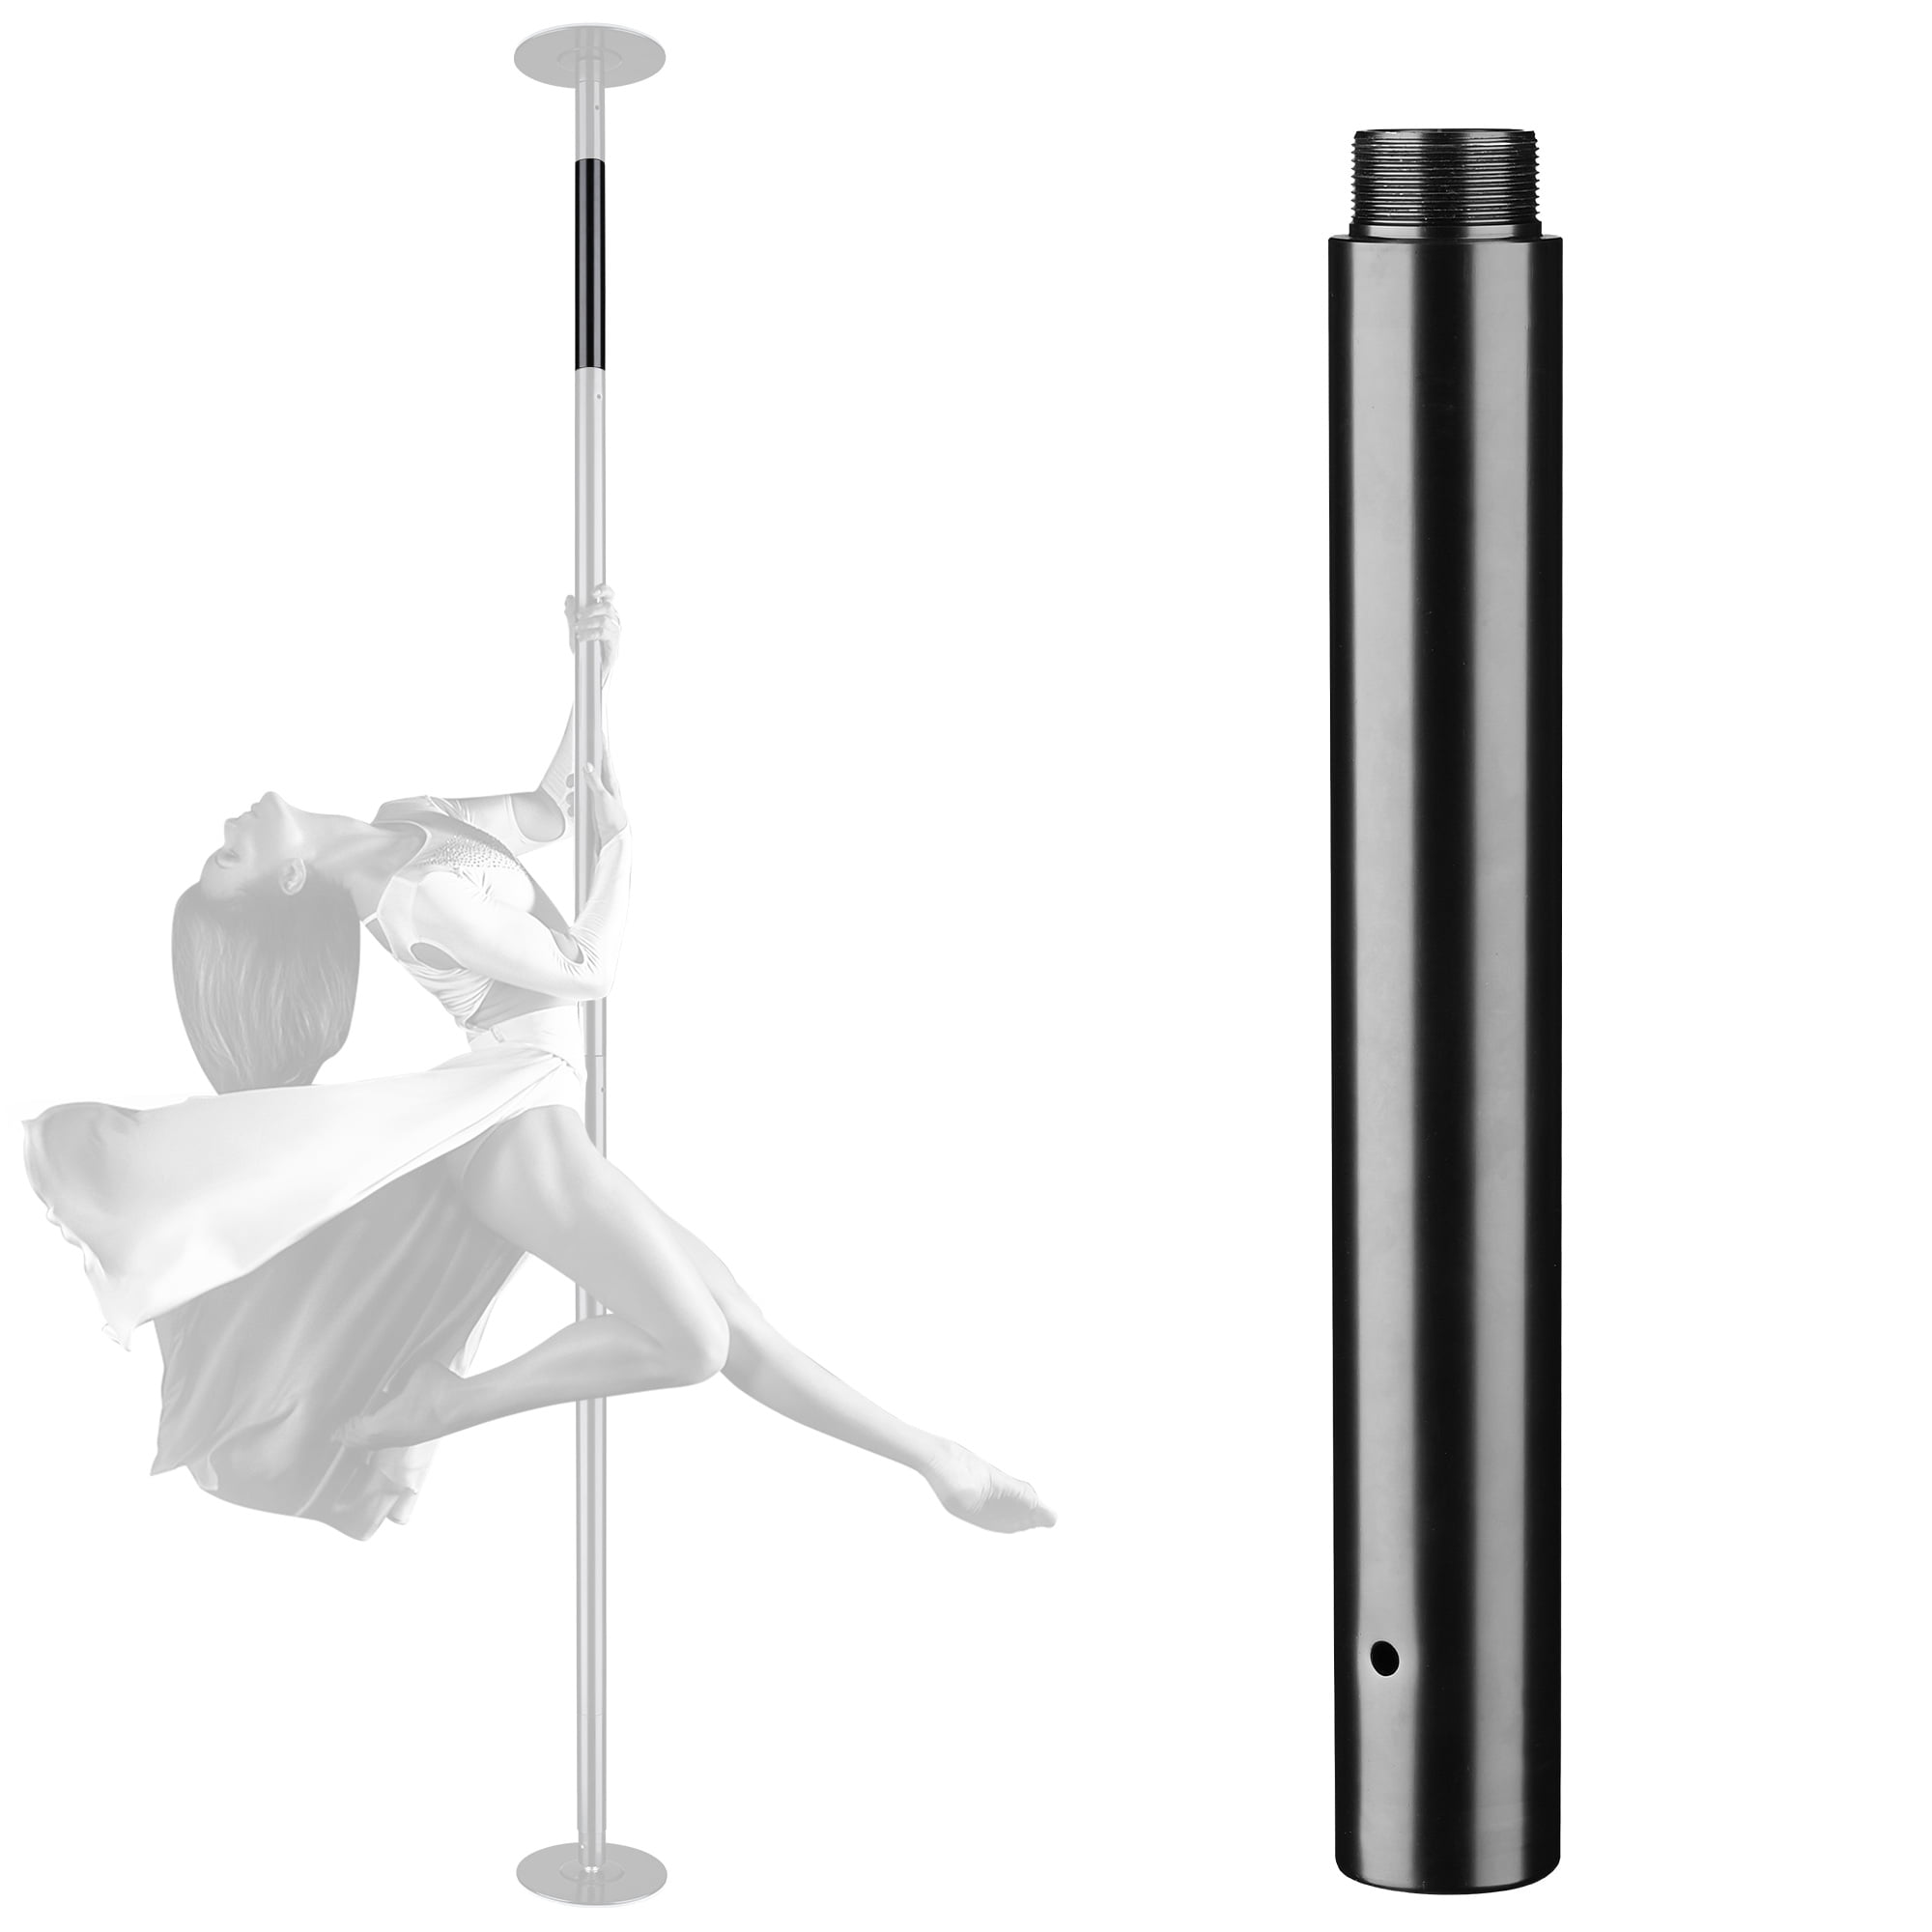 Dance Pole Extension Tube Professional Spinning Dancing Pole Portable Removable Stripper Fitness Pole Extension Tube w/Smooth Connection for Training & Exercise 